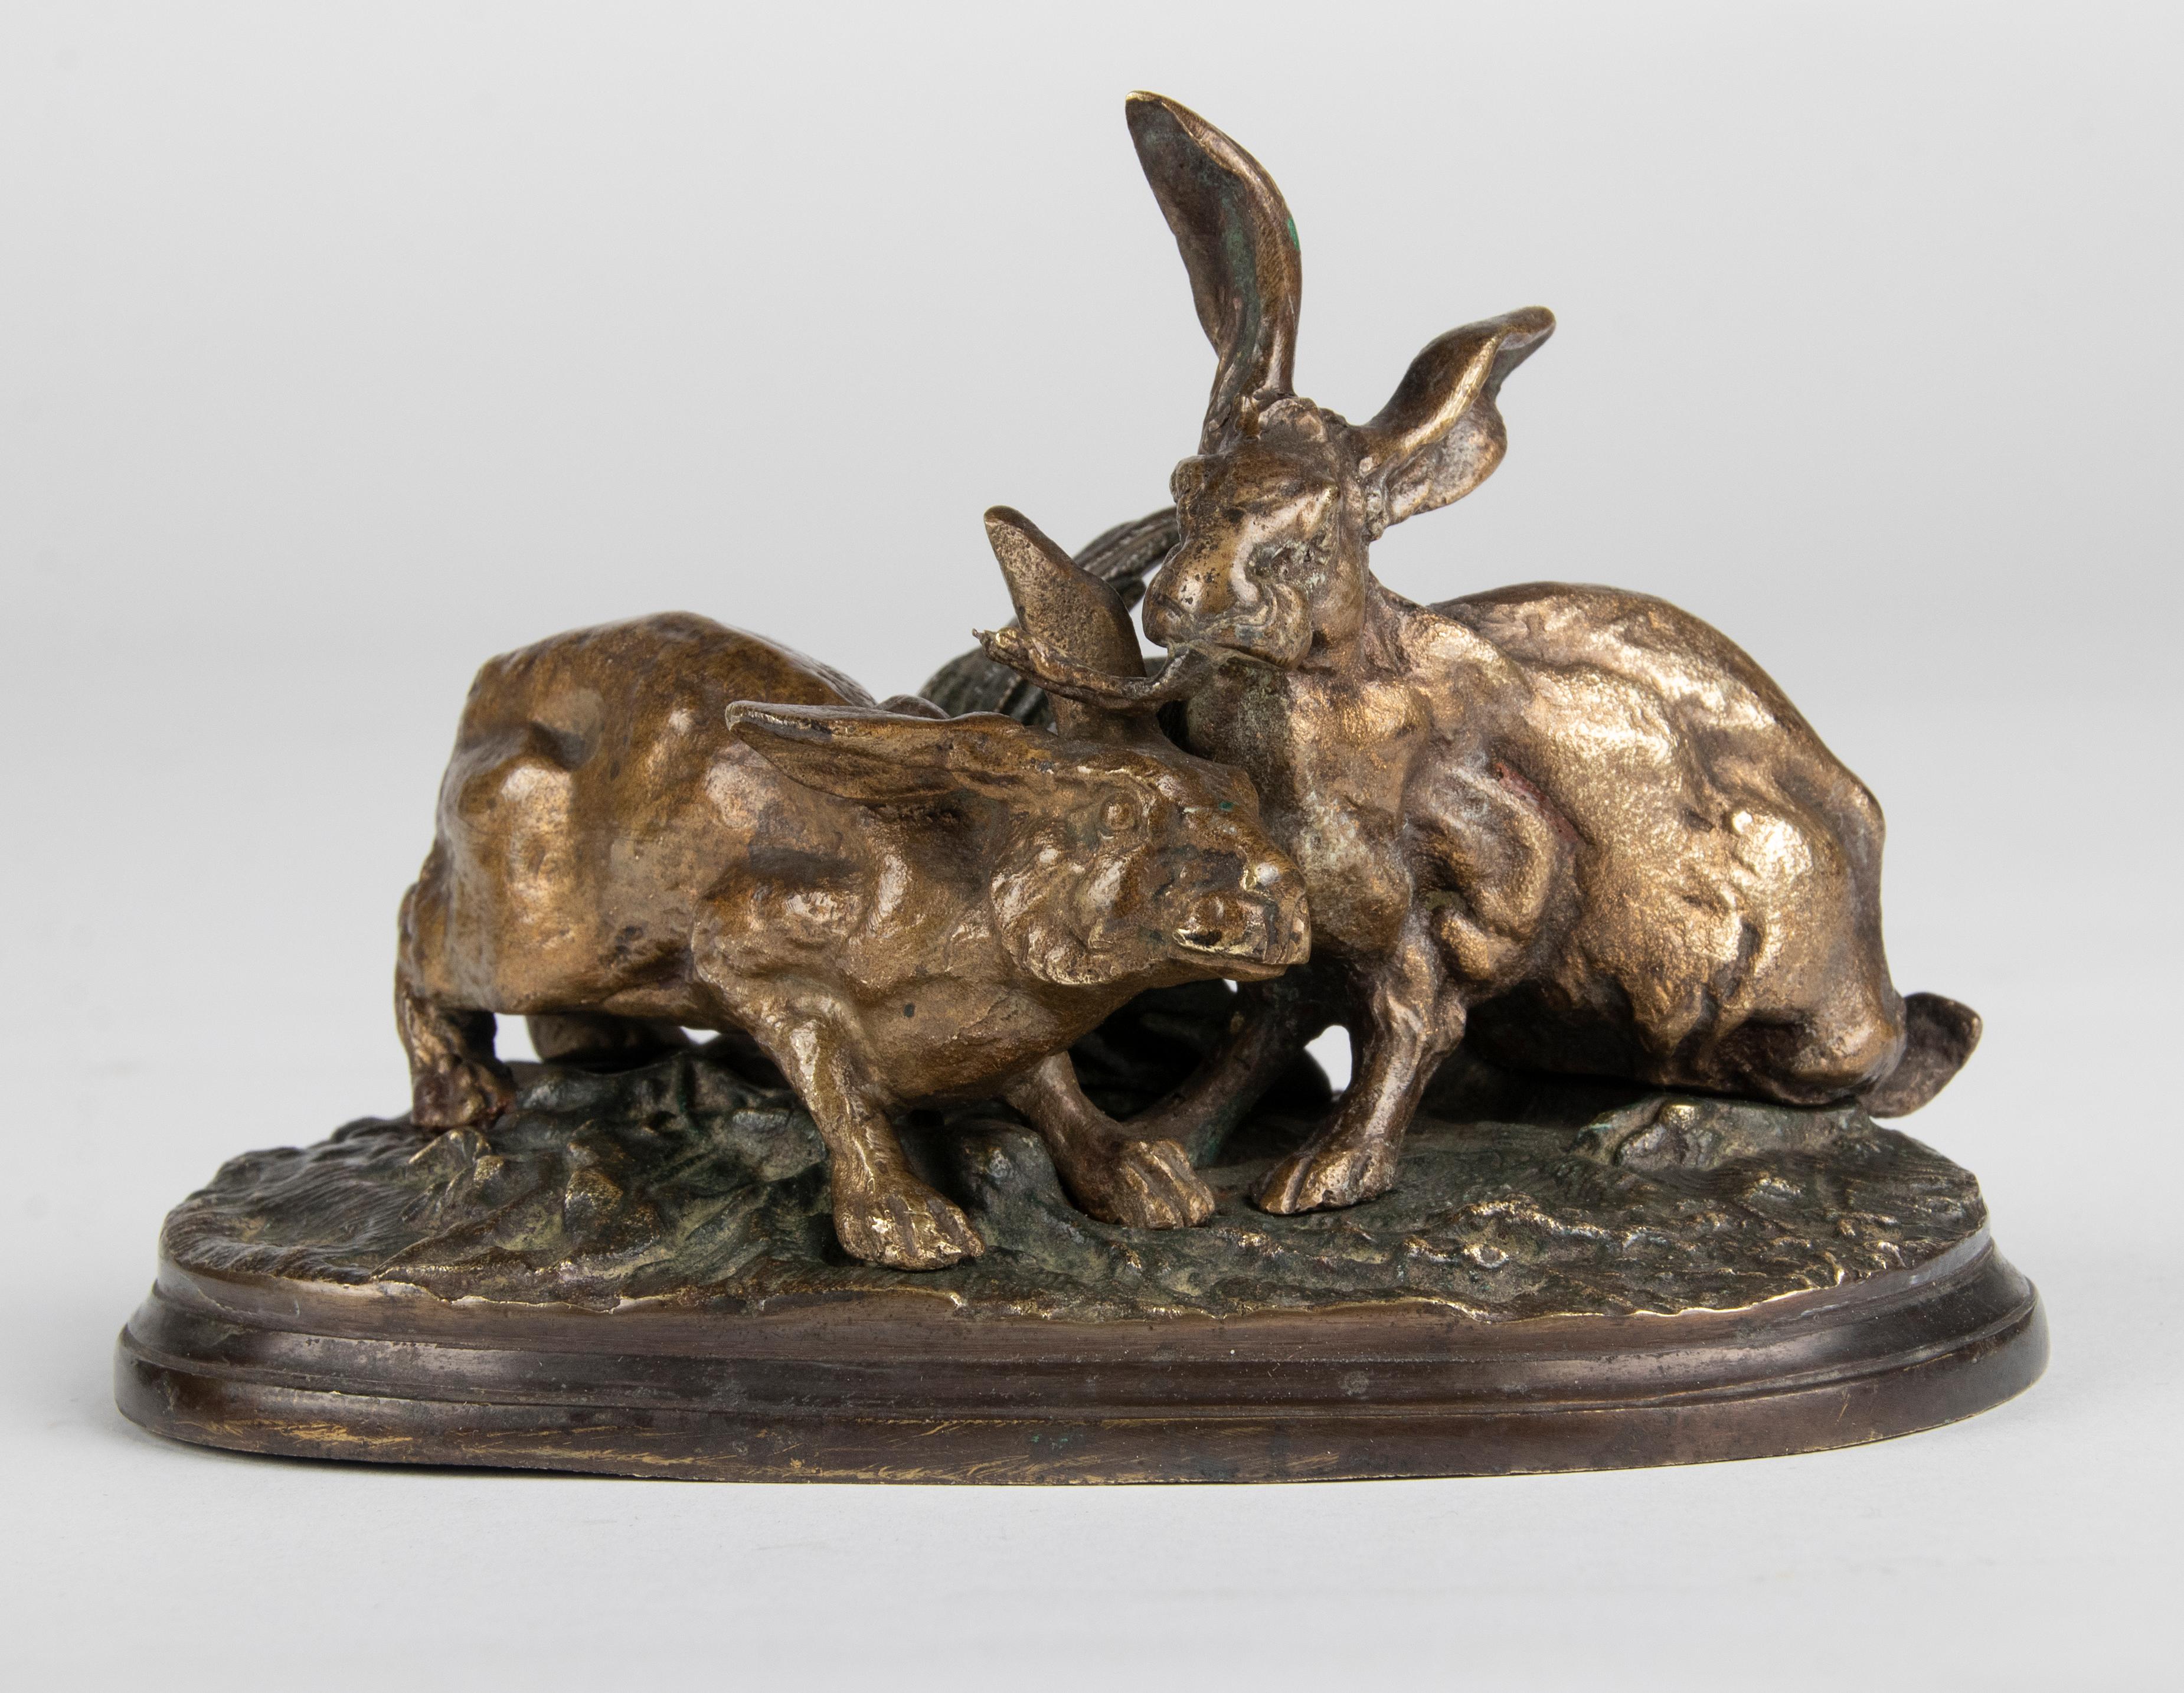 A refined small bronze sculpture with a group of hares. Accurate anatomical proportions. With the original patina. Signed on the base: PJ Mène.

Pierre-Jules Mêne (25 March 1810 – 20 May 1879) was a French sculptor and animalier. He is considered